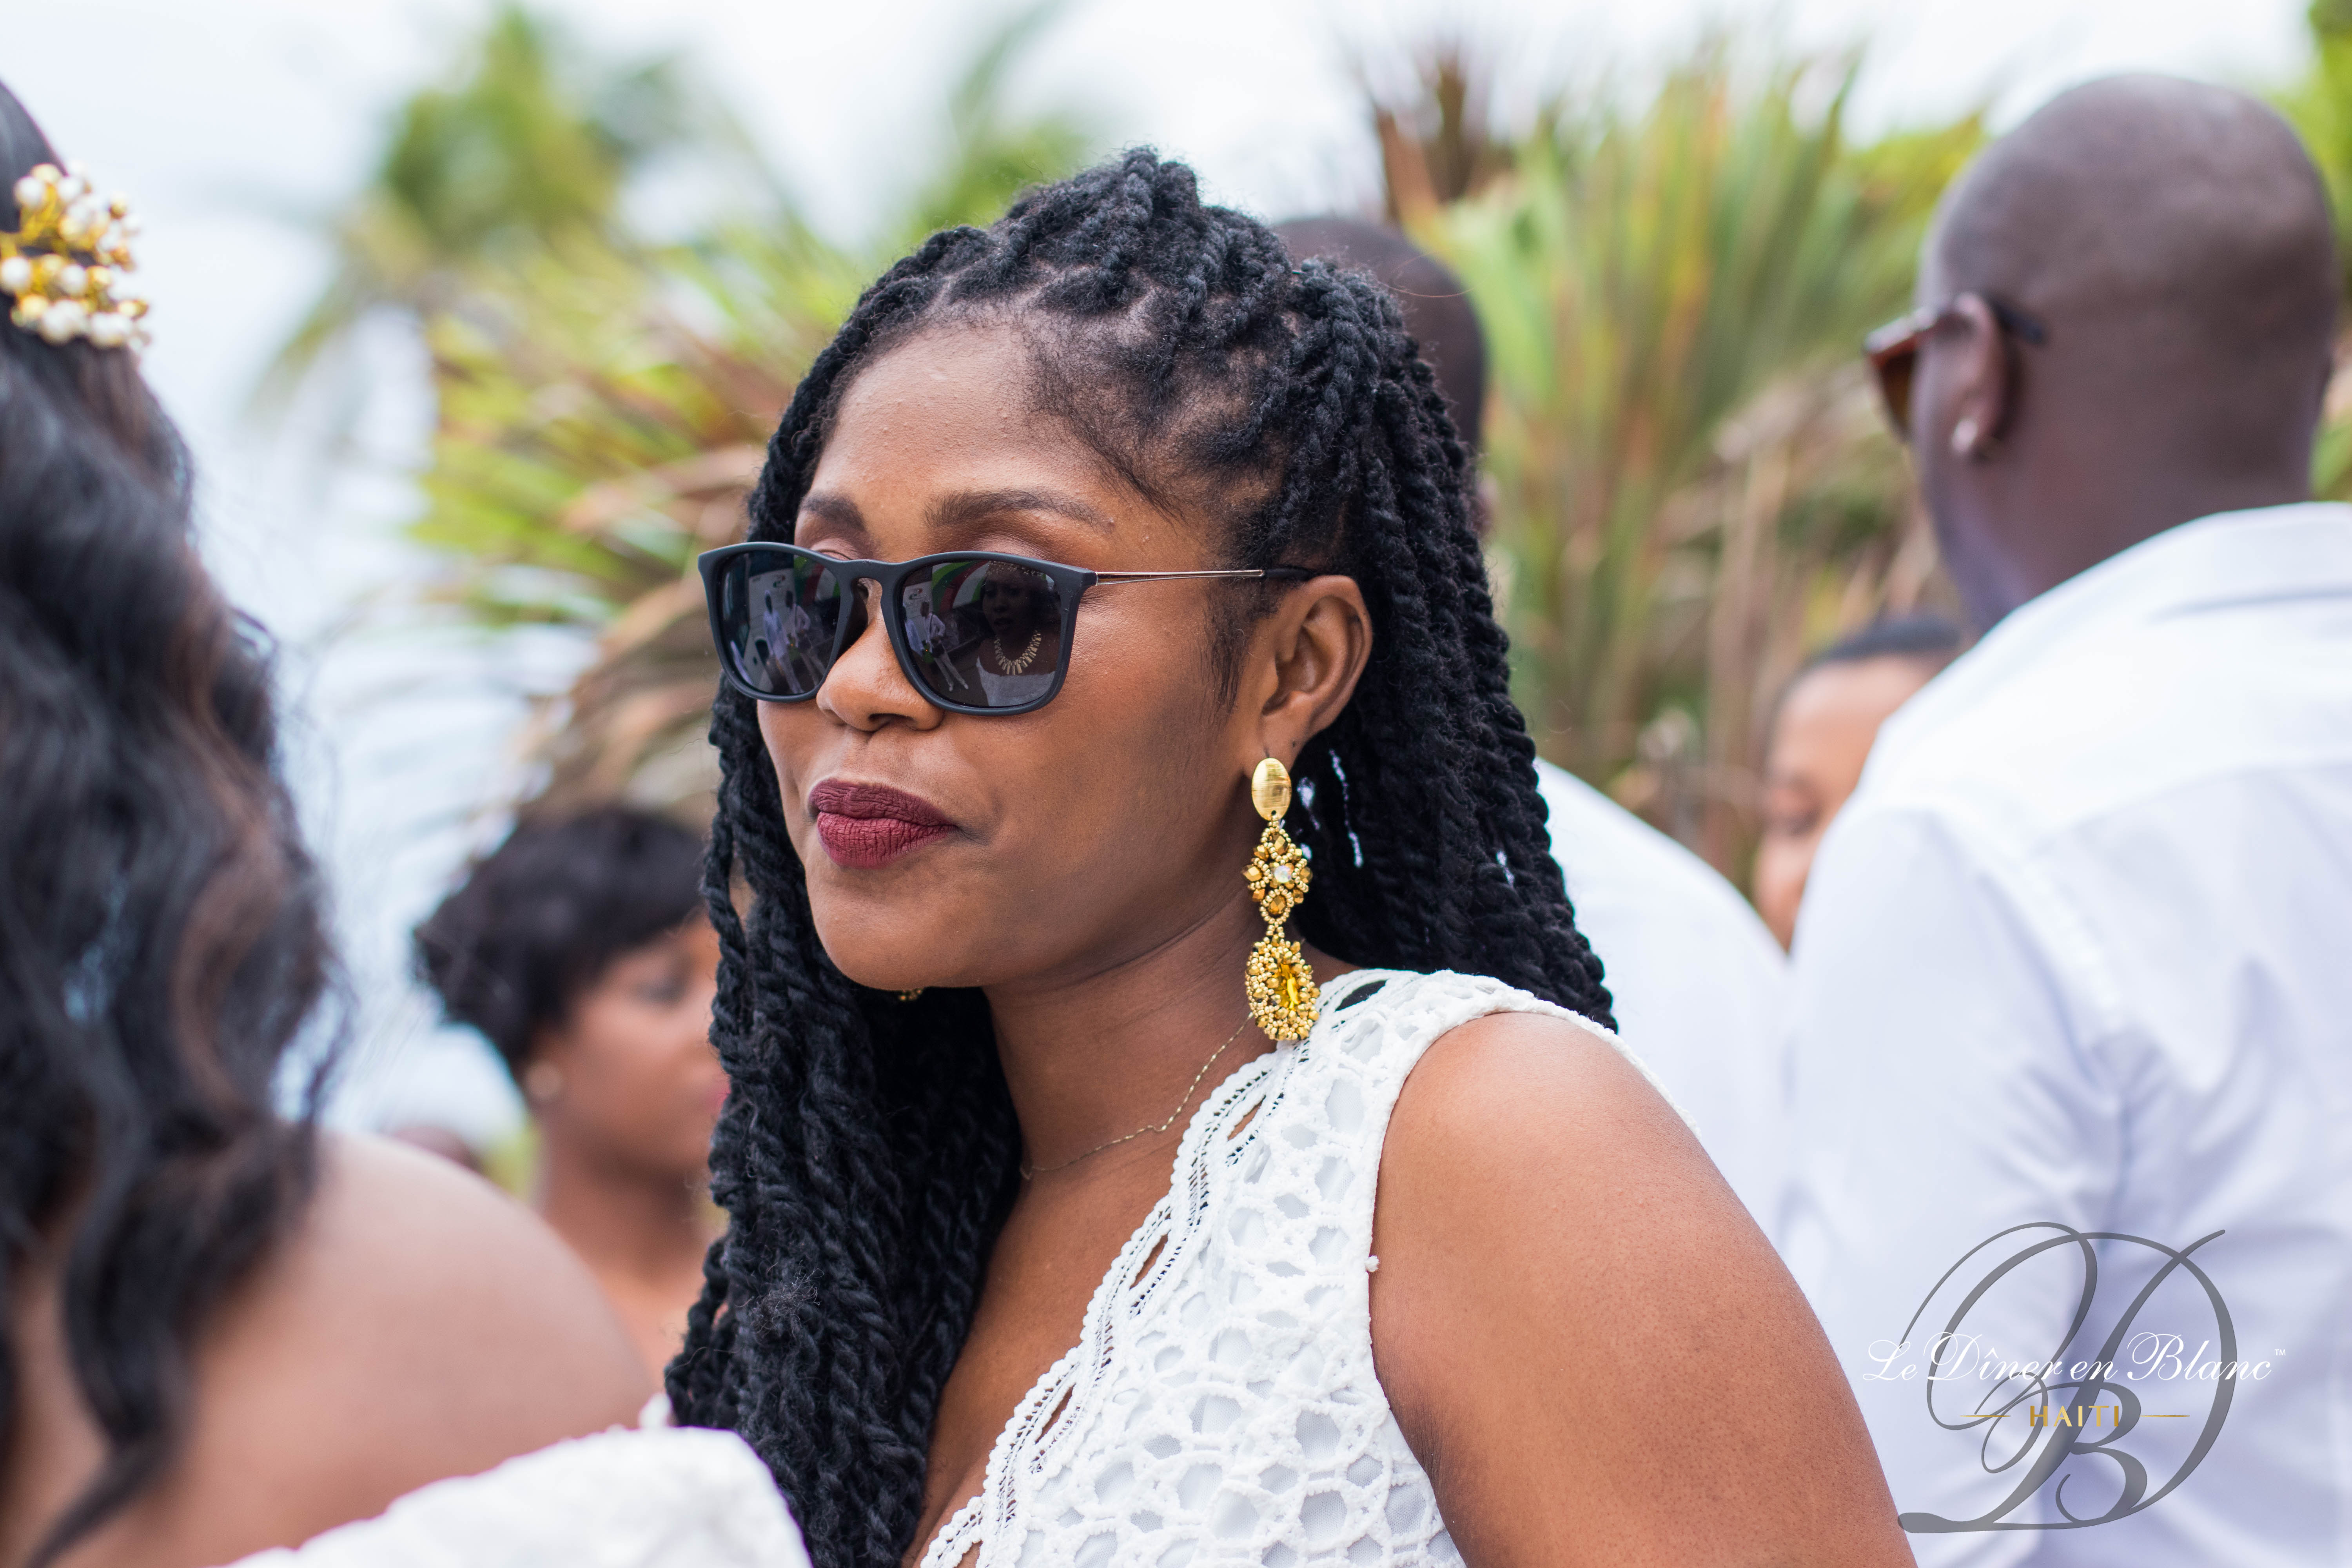 These Photos From Haiti's Dîner en Blanc Have Us Ready To Party Like Haitians